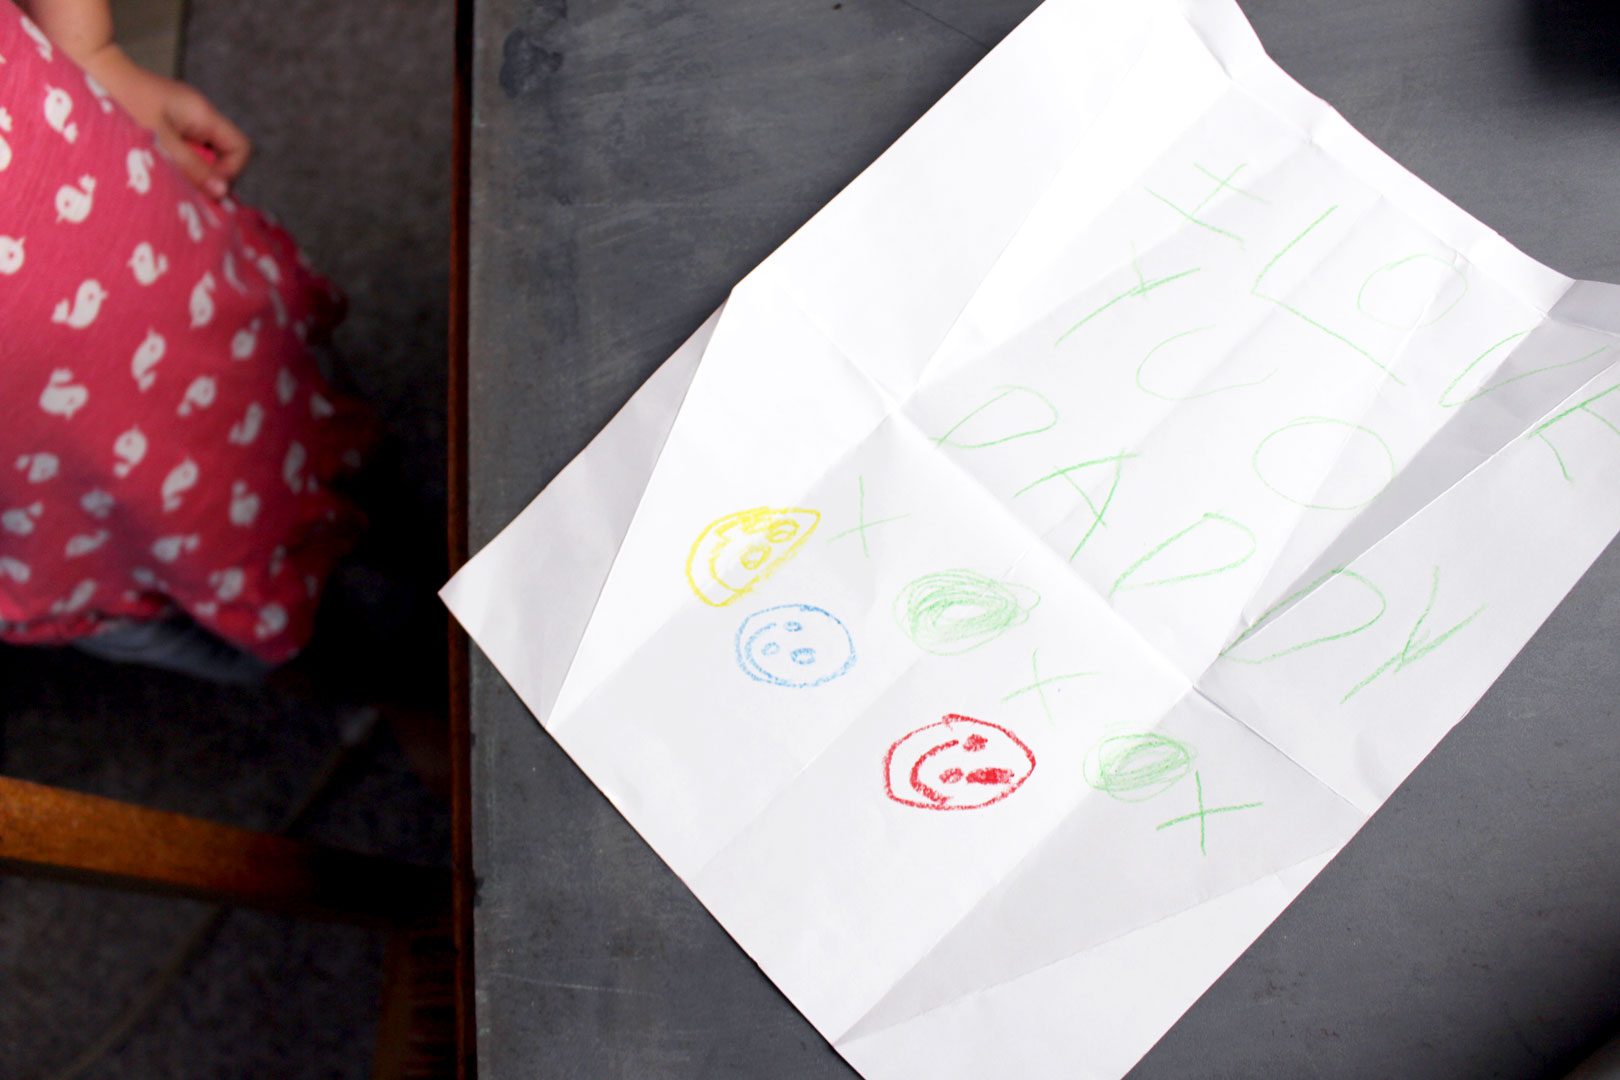 A folded piece of paper opened to show a child's drawing.